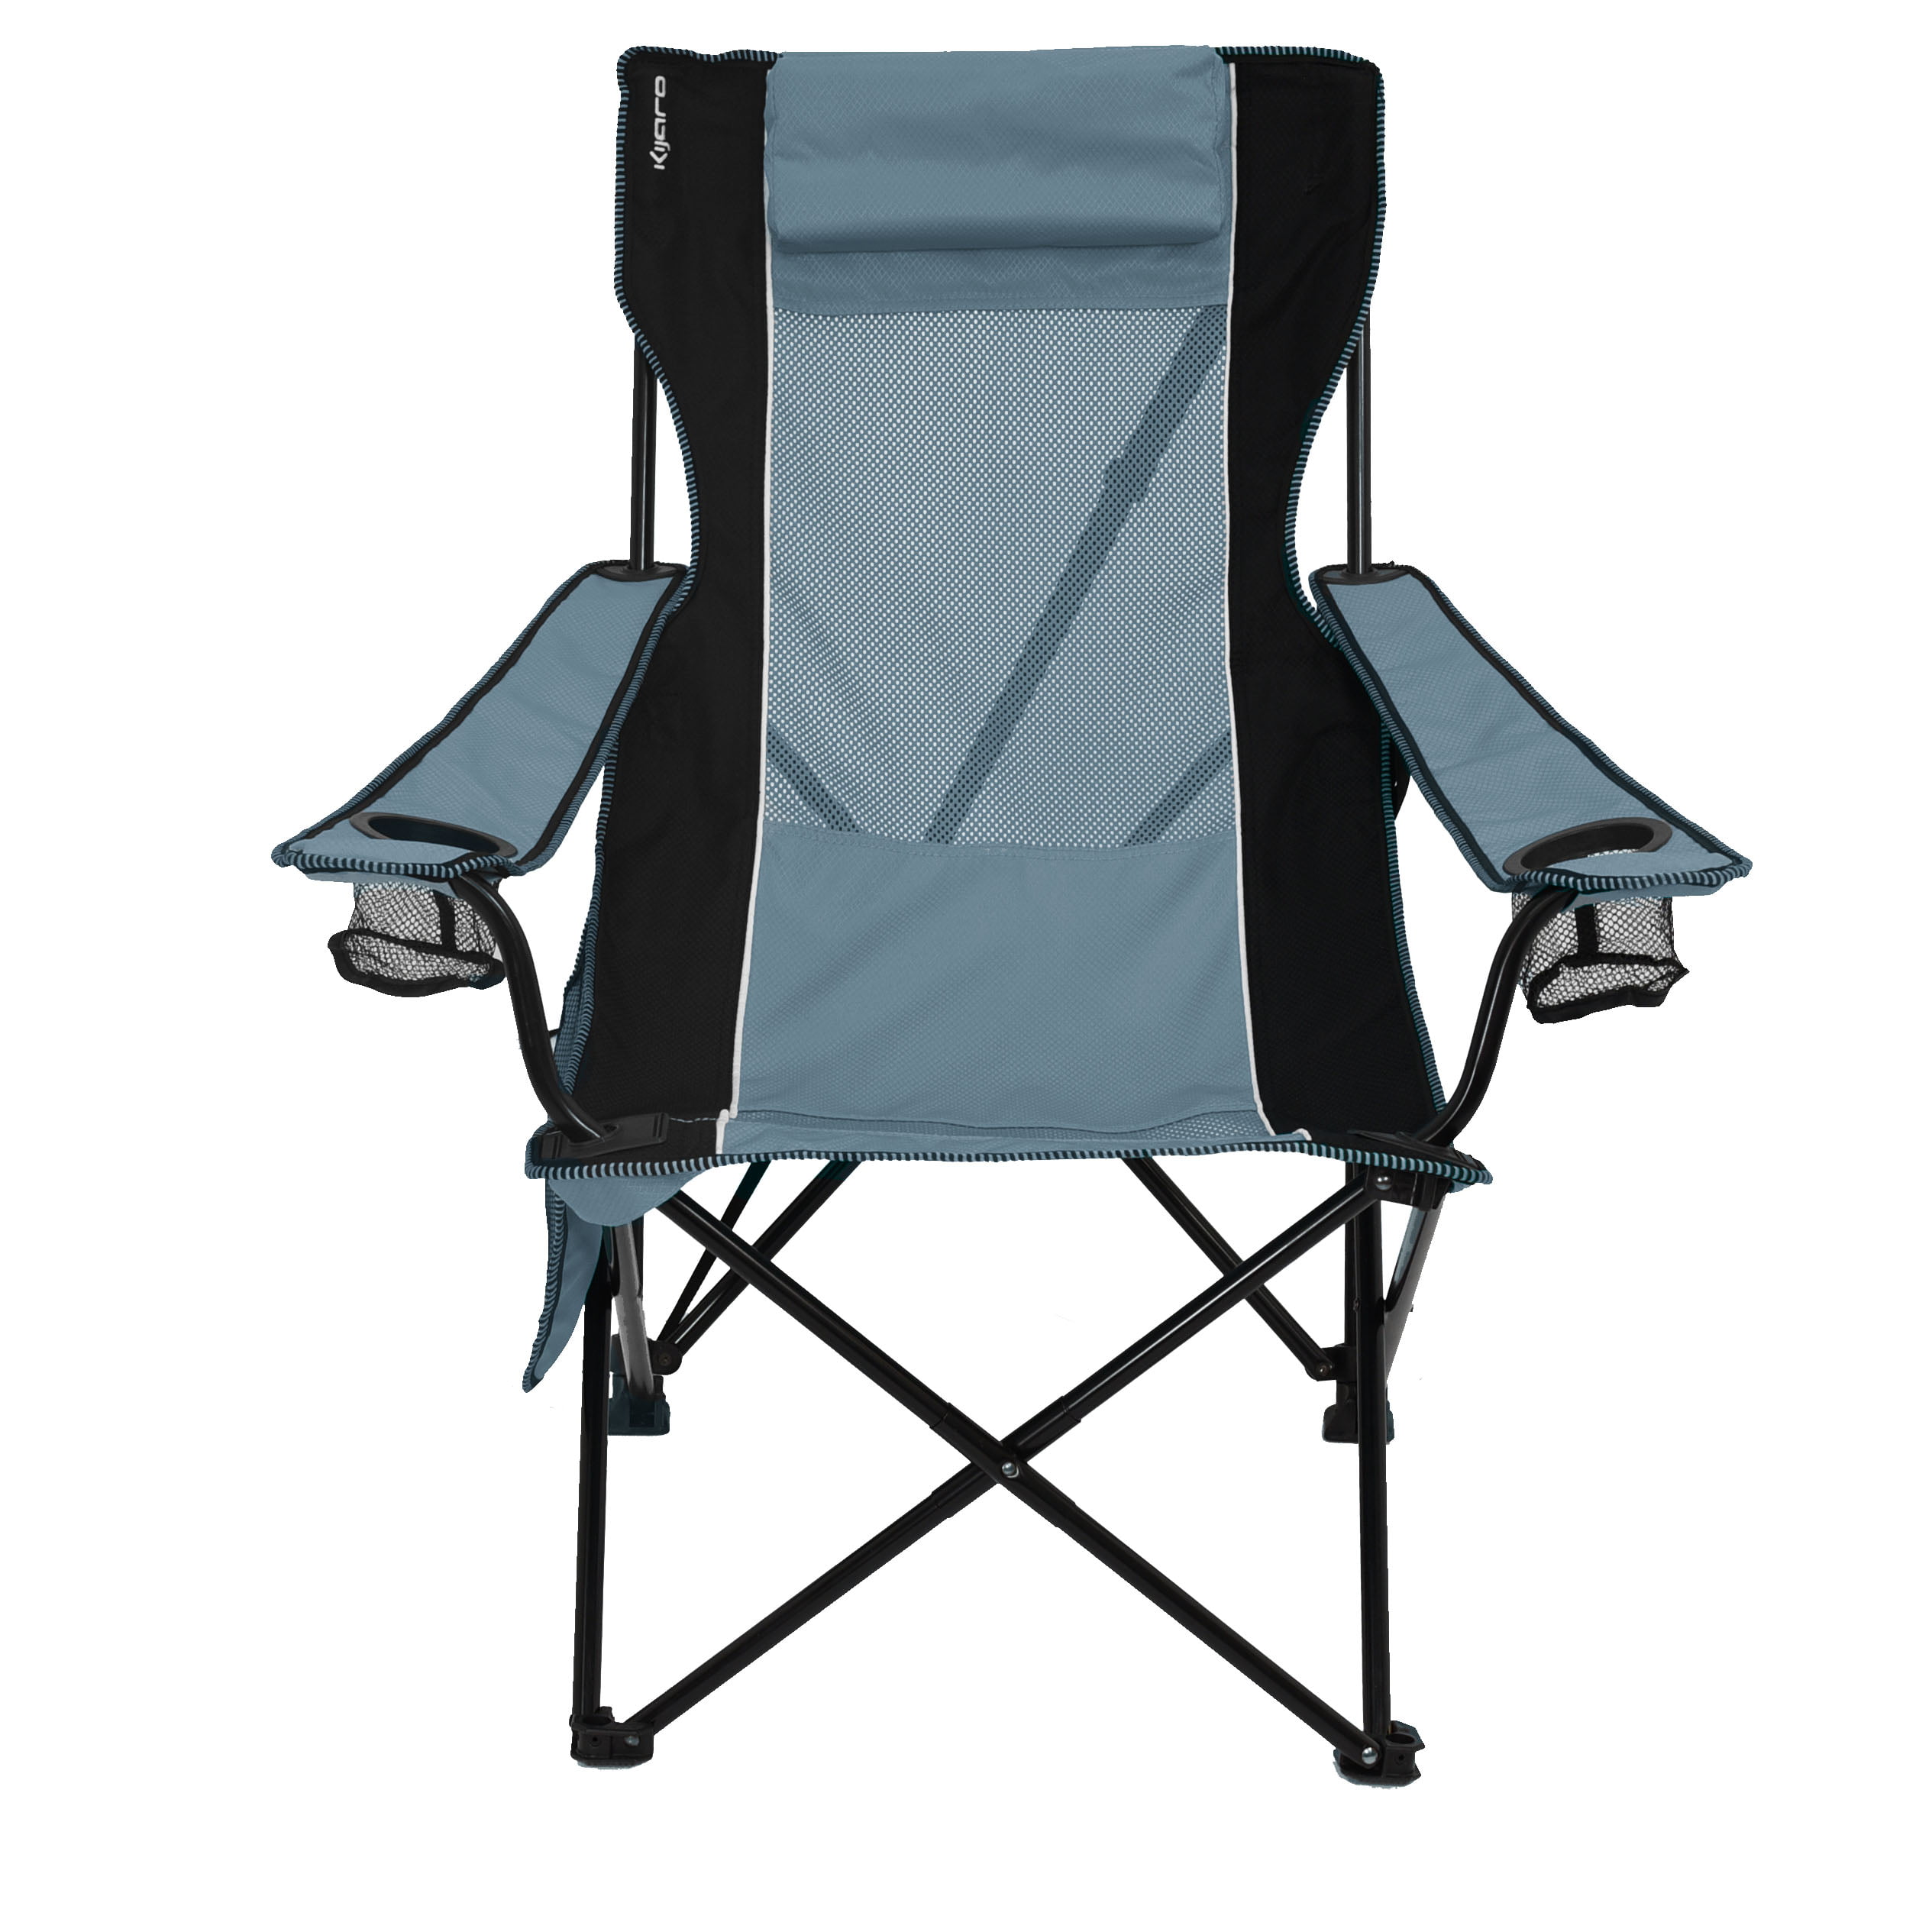 Modern Kijaro Beach Sling Chair Review for Small Space